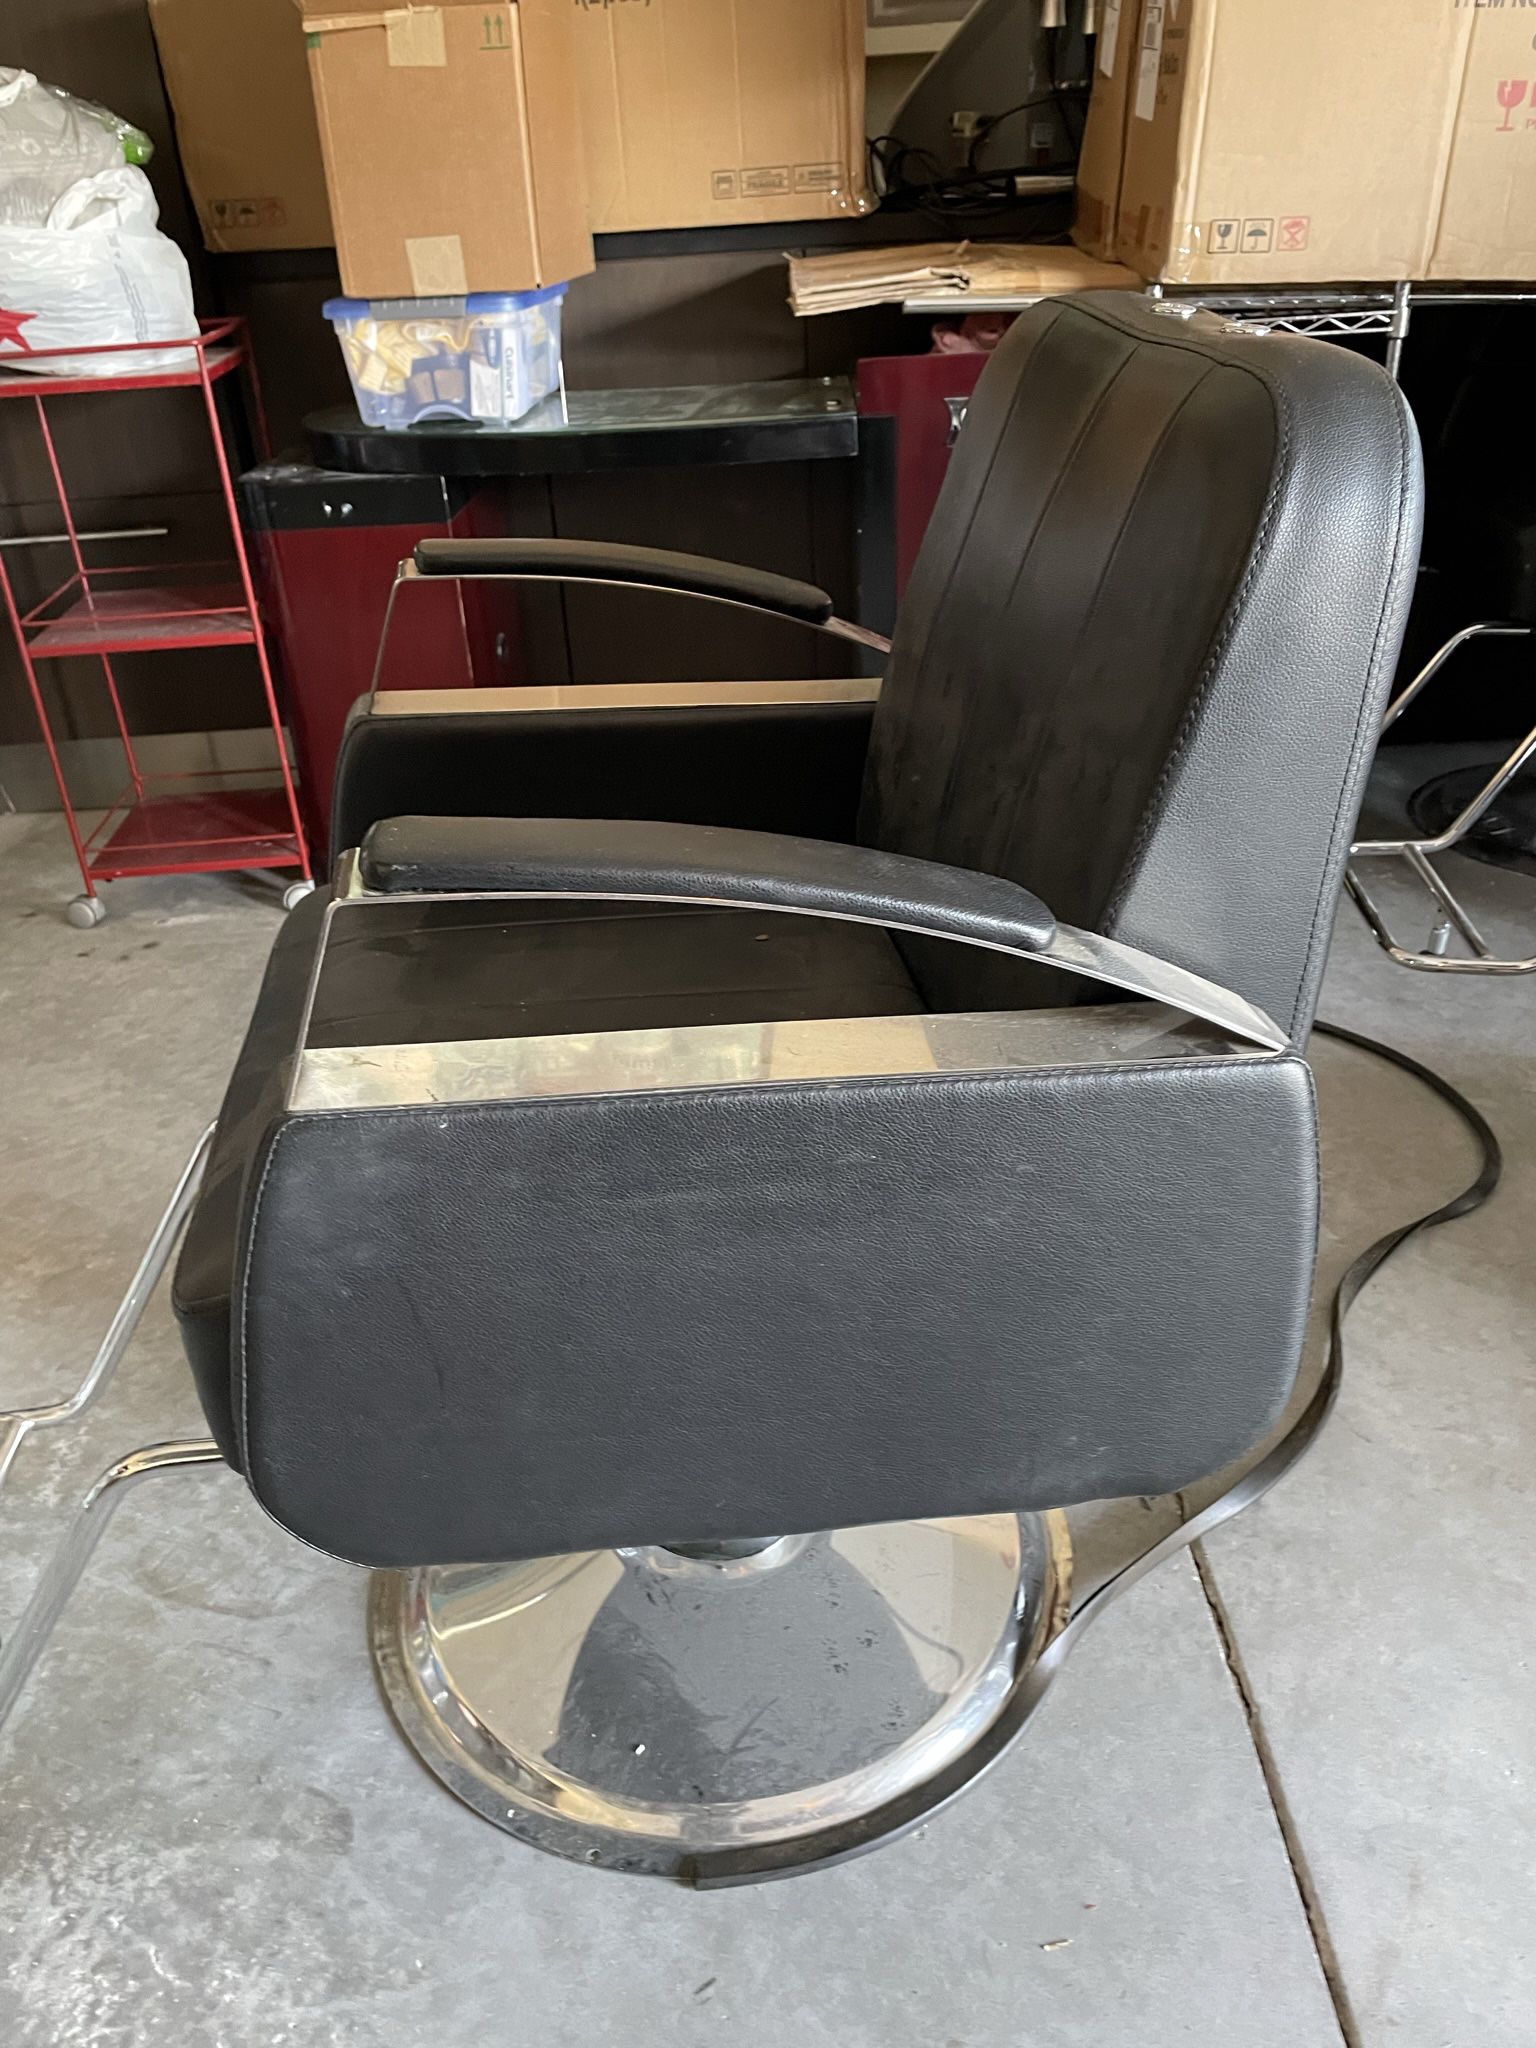 Barber Chairs